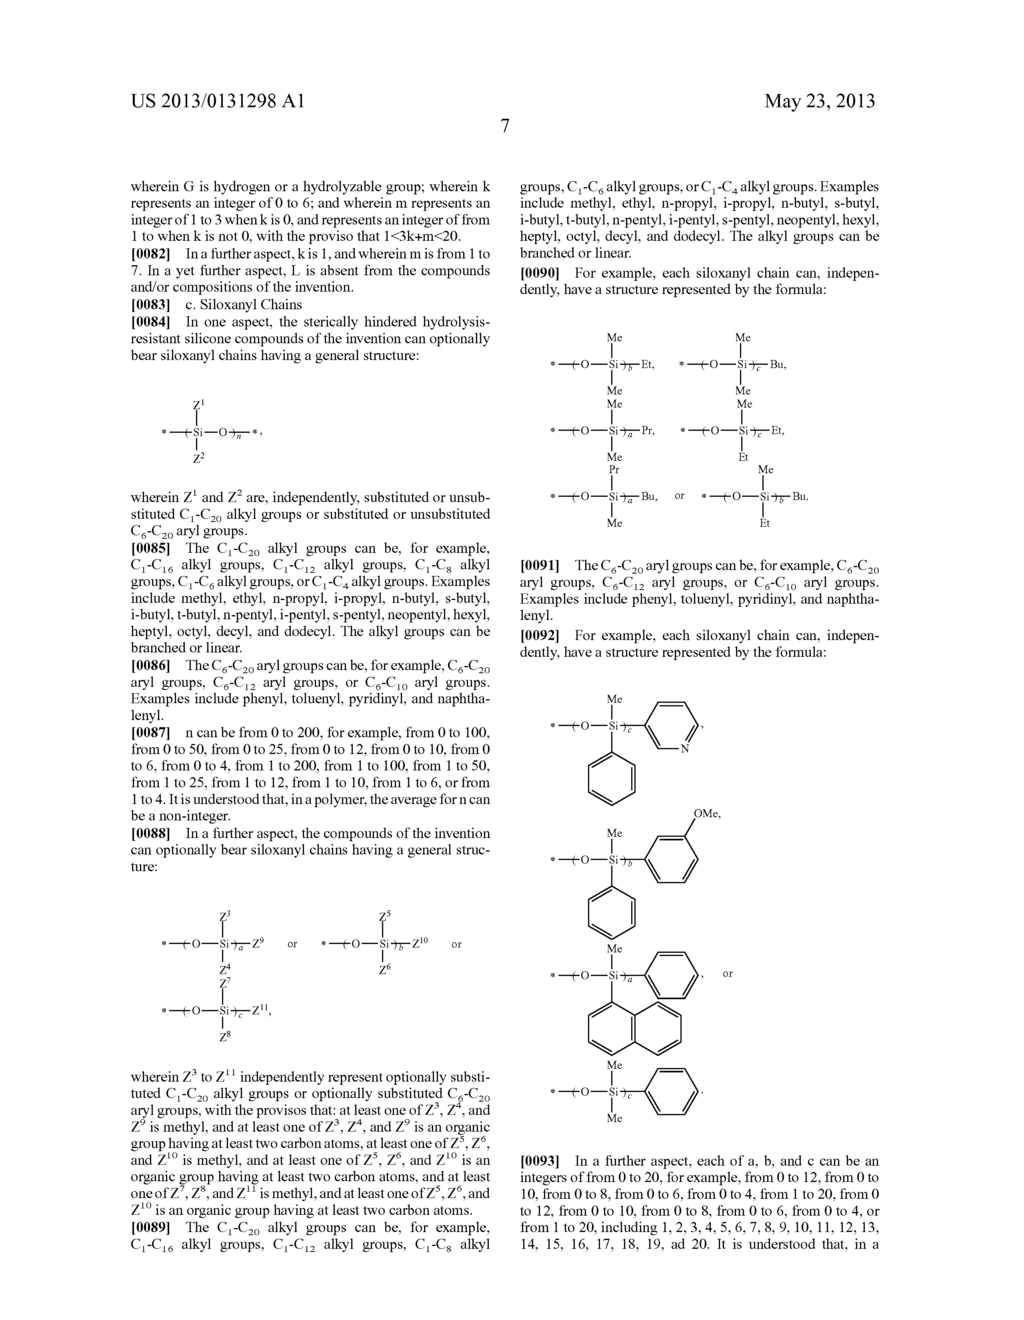 HYDROLYSIS-RESISTANT SILICONE COMPOUNDS - diagram, schematic, and image 10